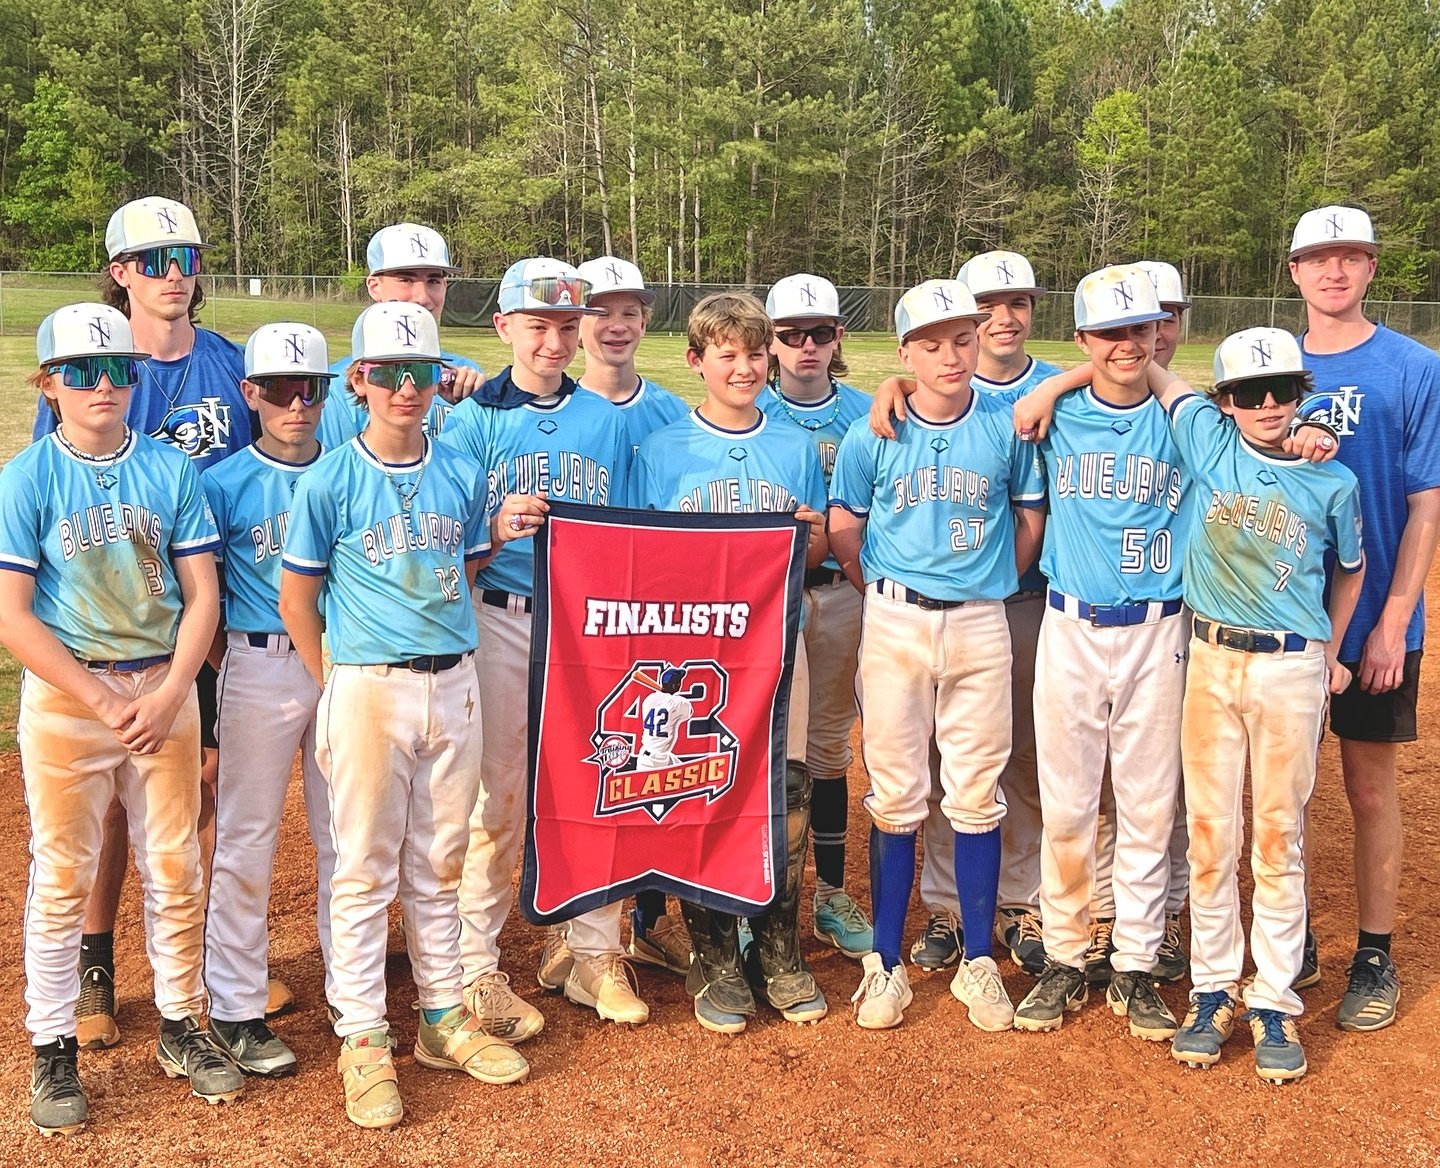 CONGRATULATIONS to the Ninth Inning Blue Jays 13u Bottoms on finishing as a finalist in the Training legends 42 Classic!